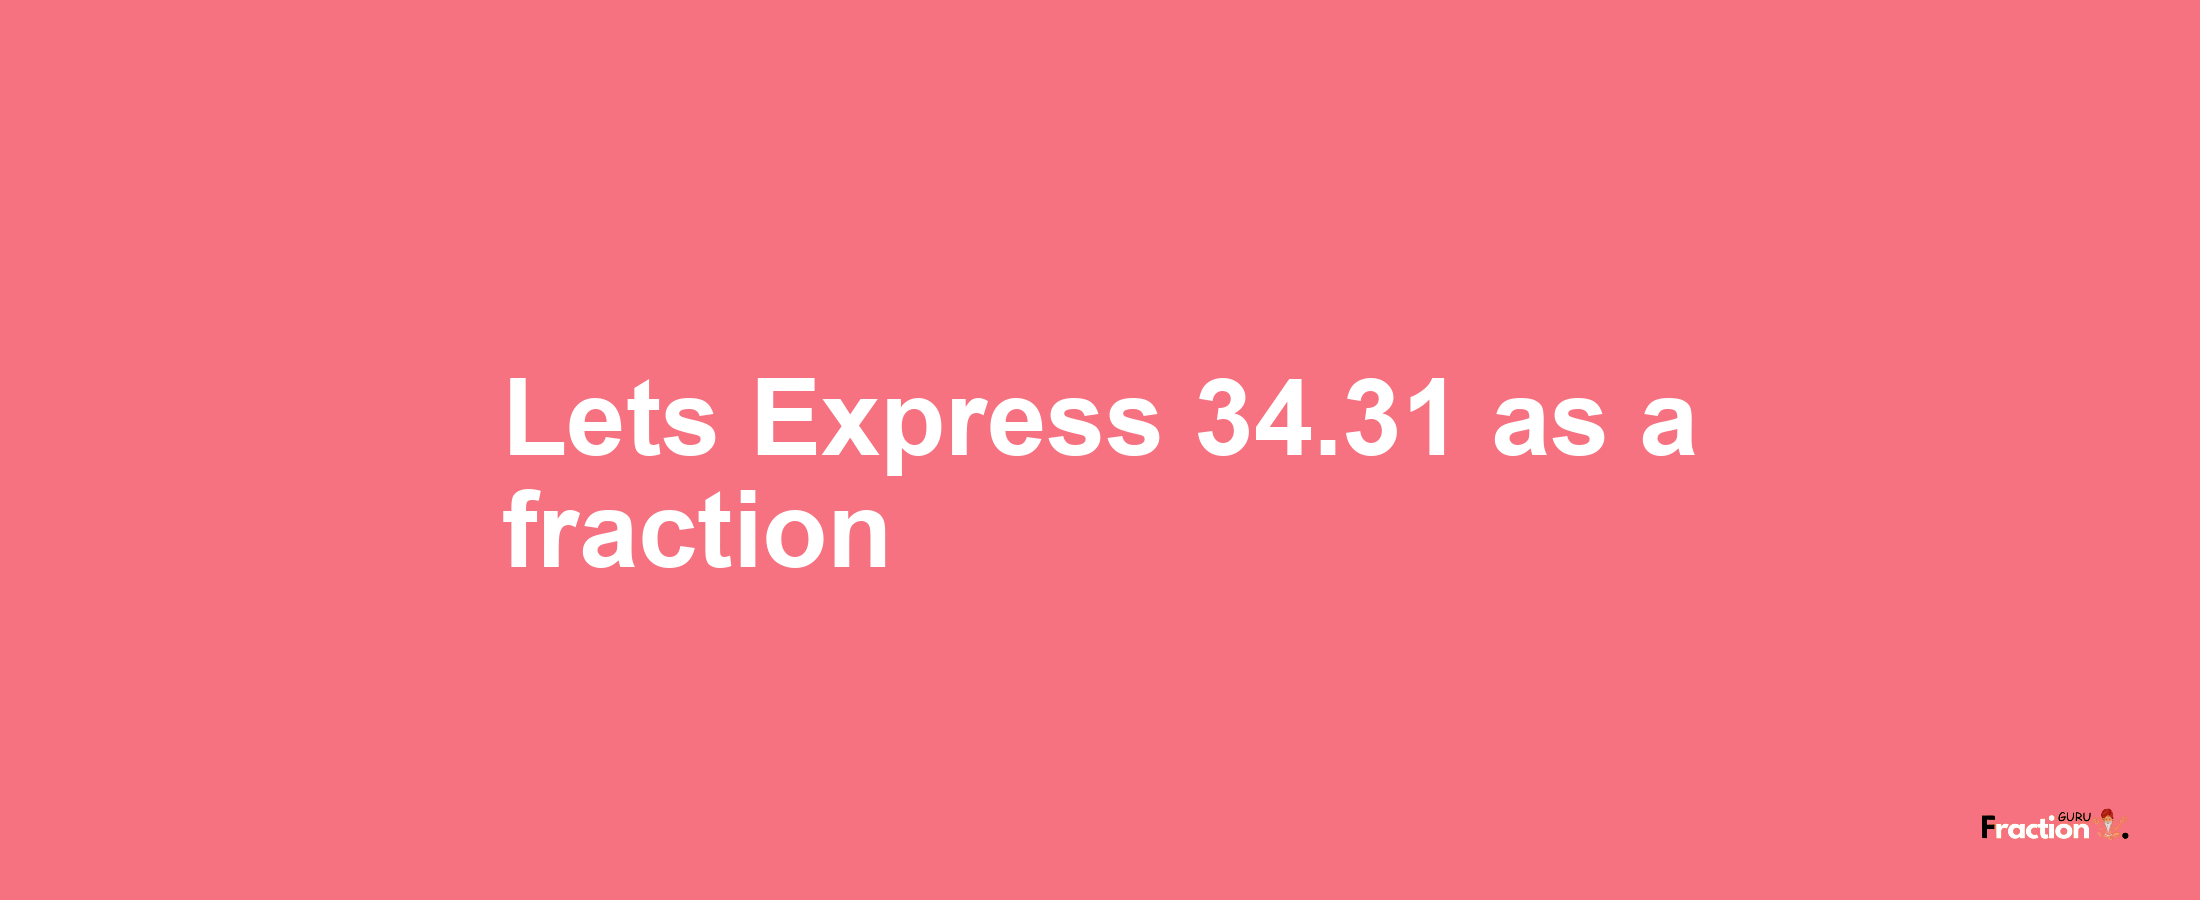 Lets Express 34.31 as afraction